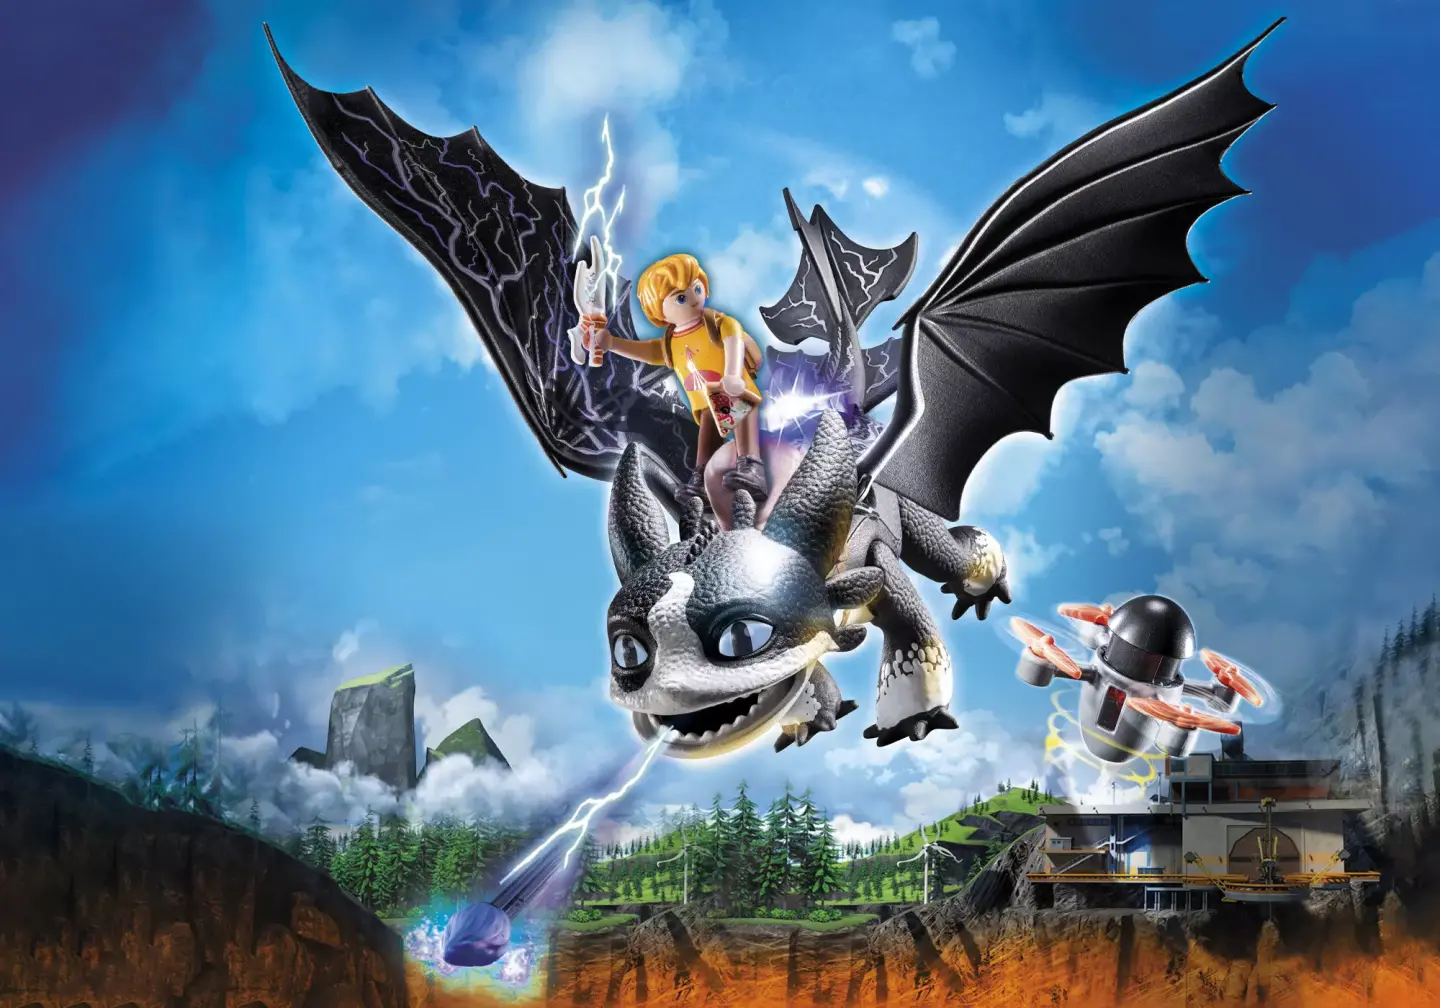 Dragons: The Nine Realms review: How to Train Your Dragon jumps 1300 years  - Polygon